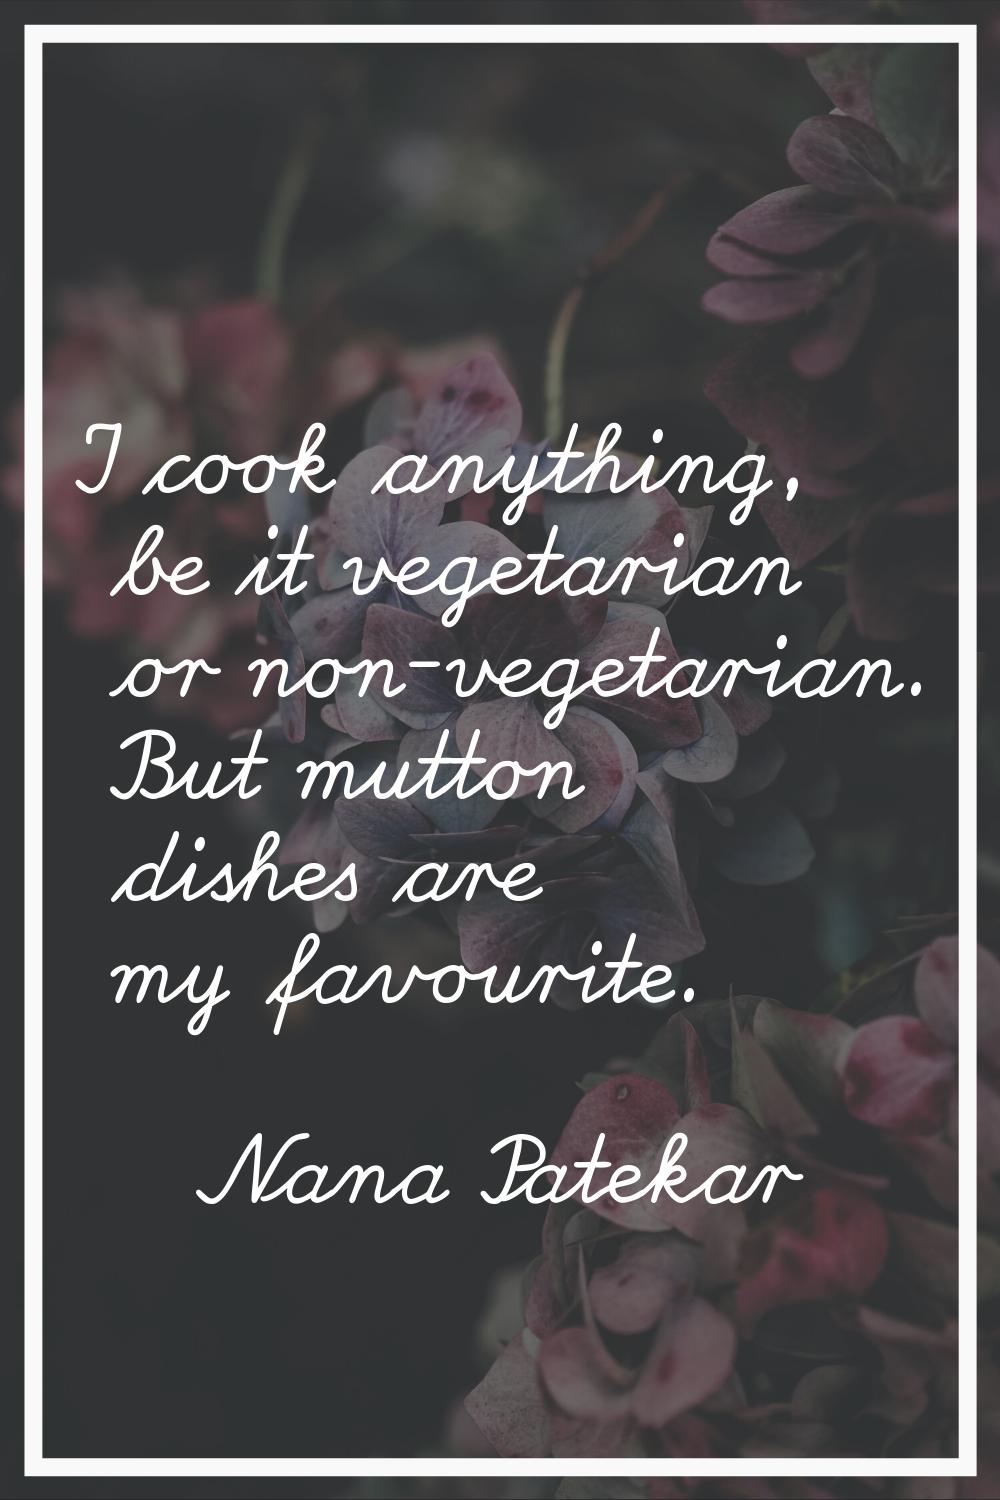 I cook anything, be it vegetarian or non-vegetarian. But mutton dishes are my favourite.